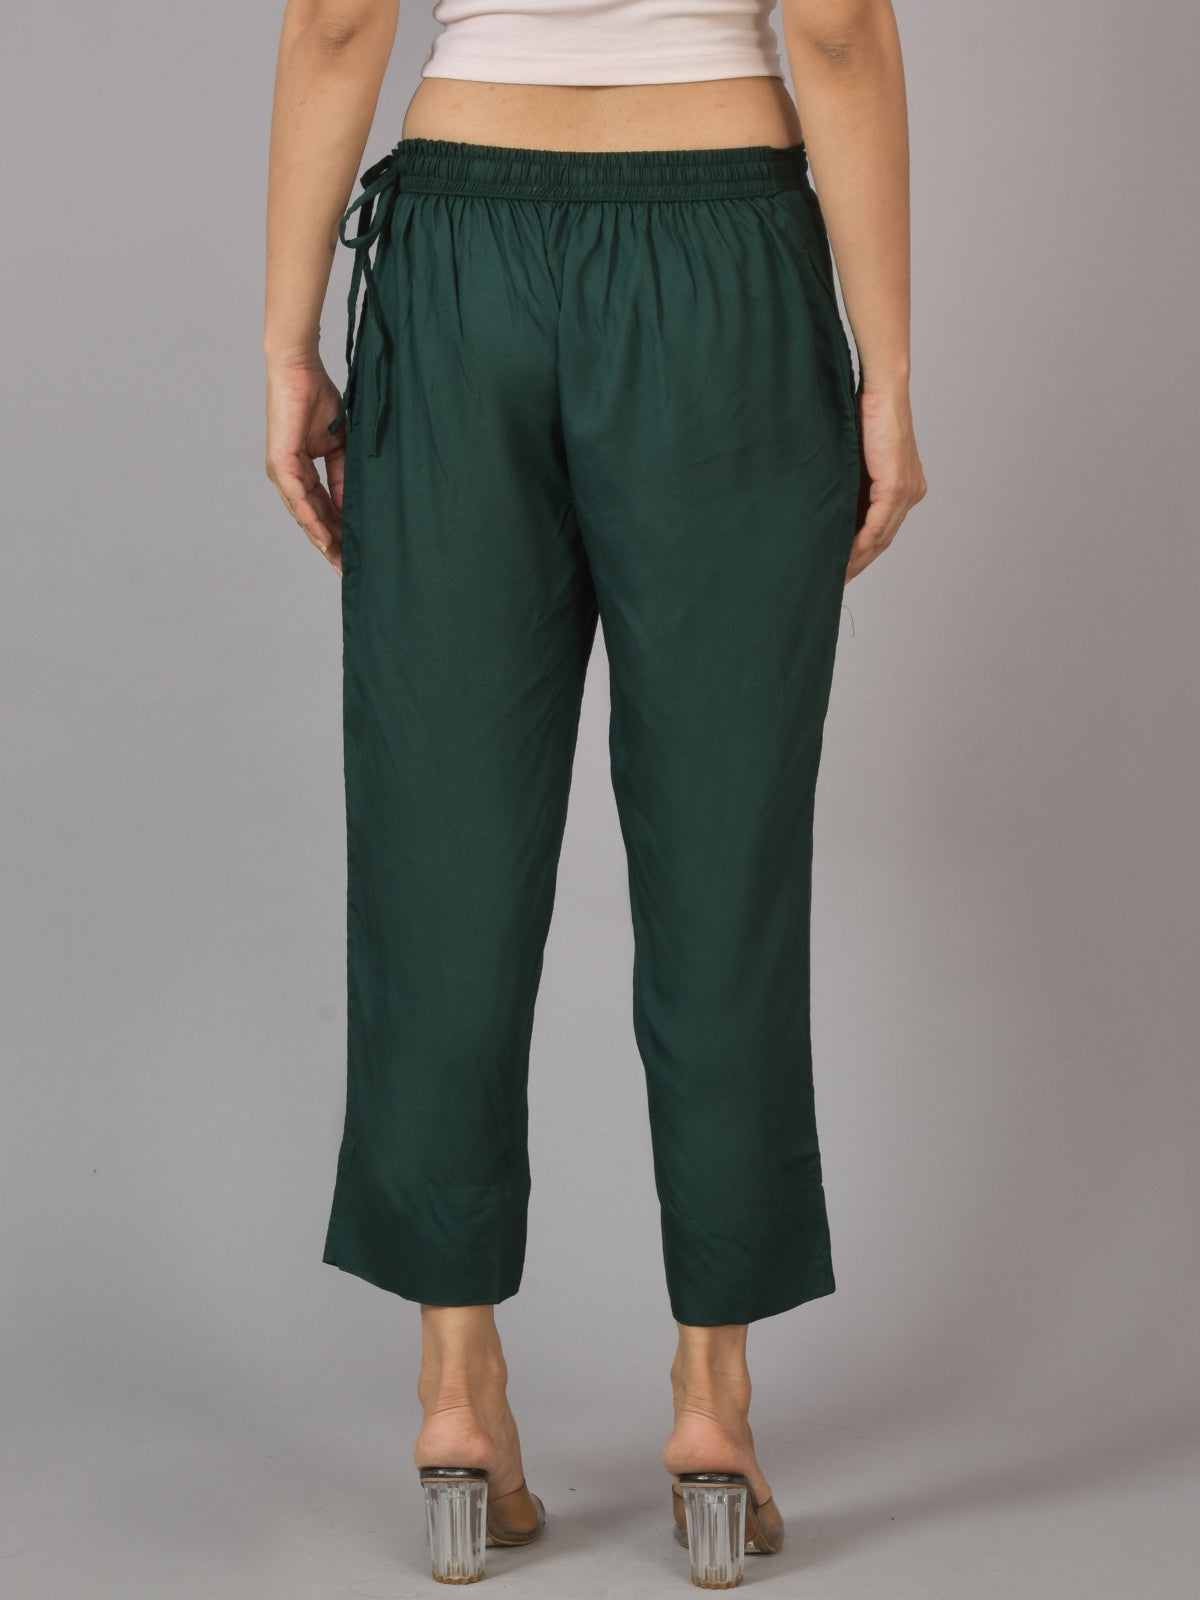 Pack Of 2 Womens Beige And Dark Green Ankle Length Rayon Culottes Trouser Combo